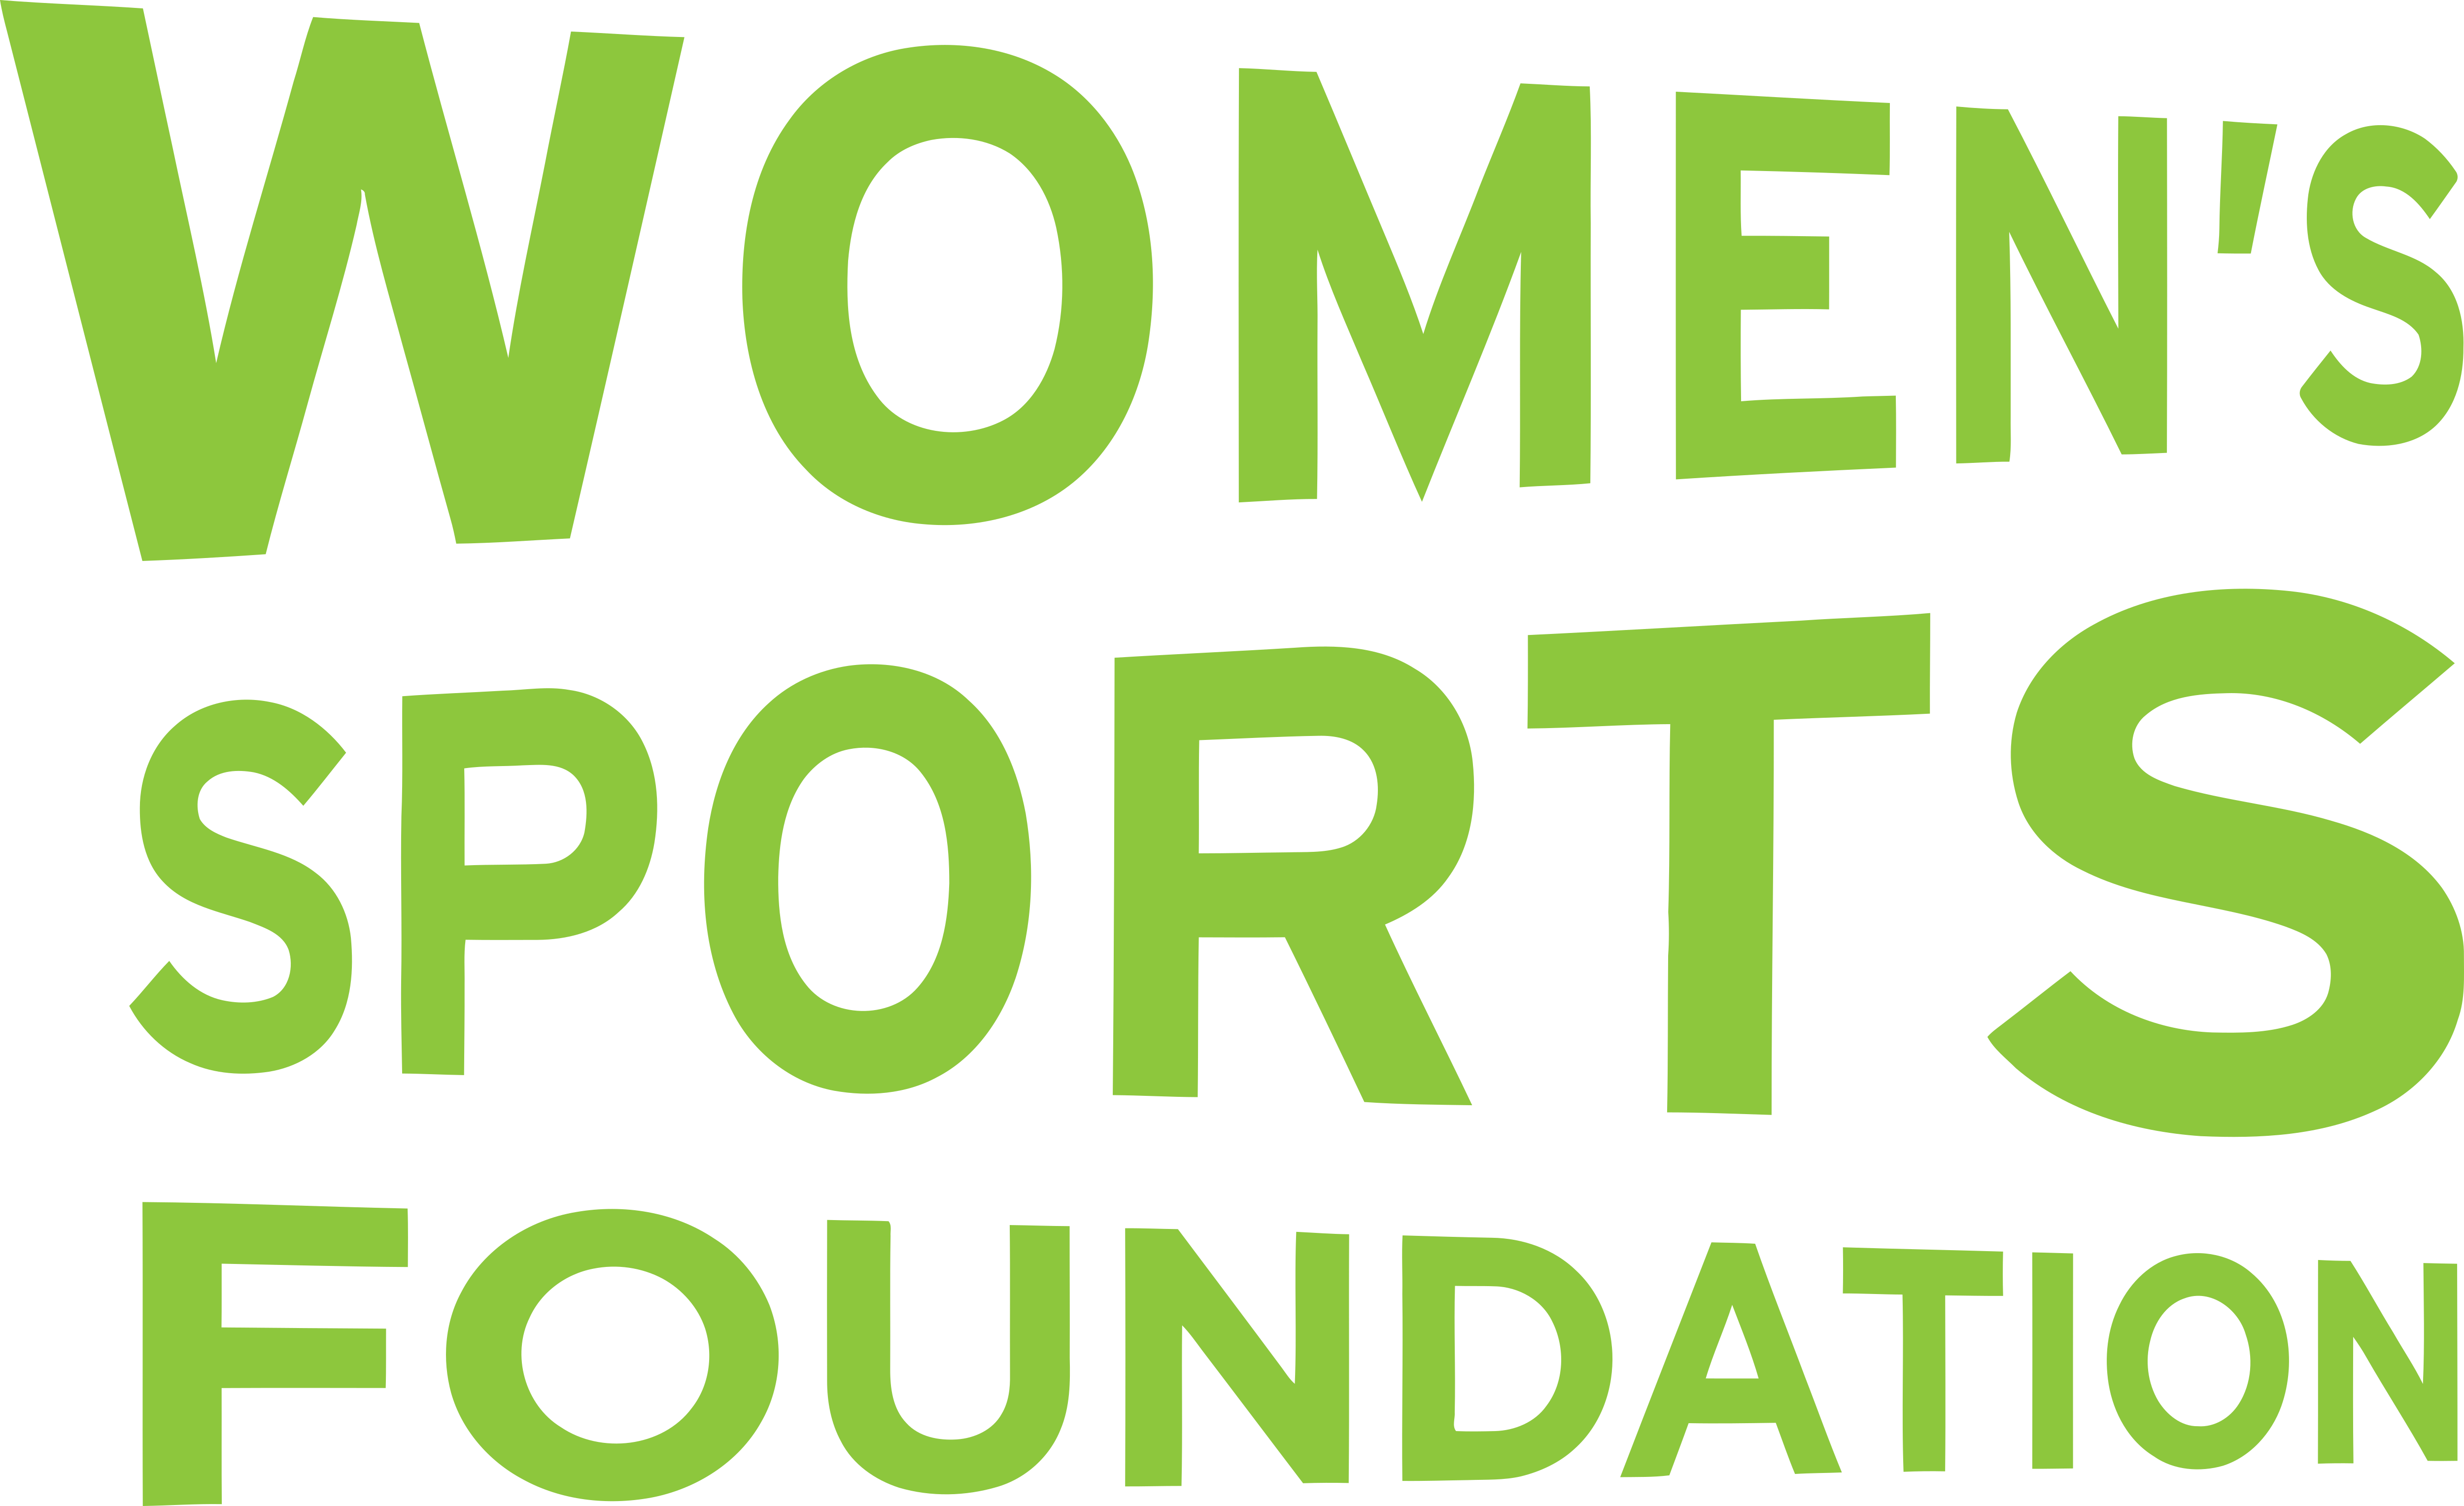 Marriage And Womenssportfoundation Have More In Common Than You Think